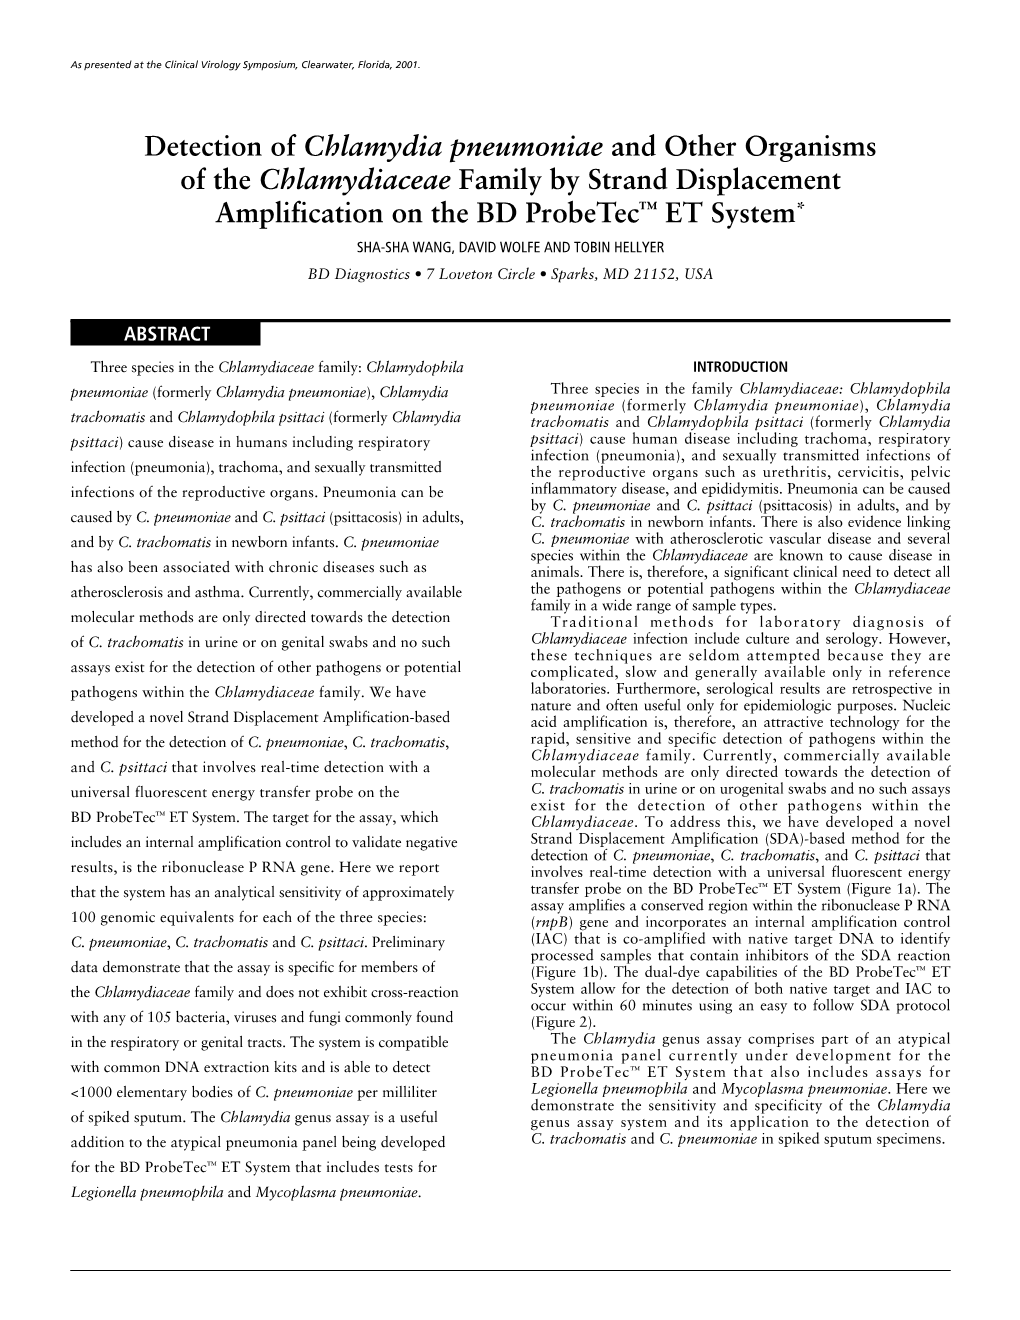 Detection of Chlamydia Pneumoniae and Other Organisms of The